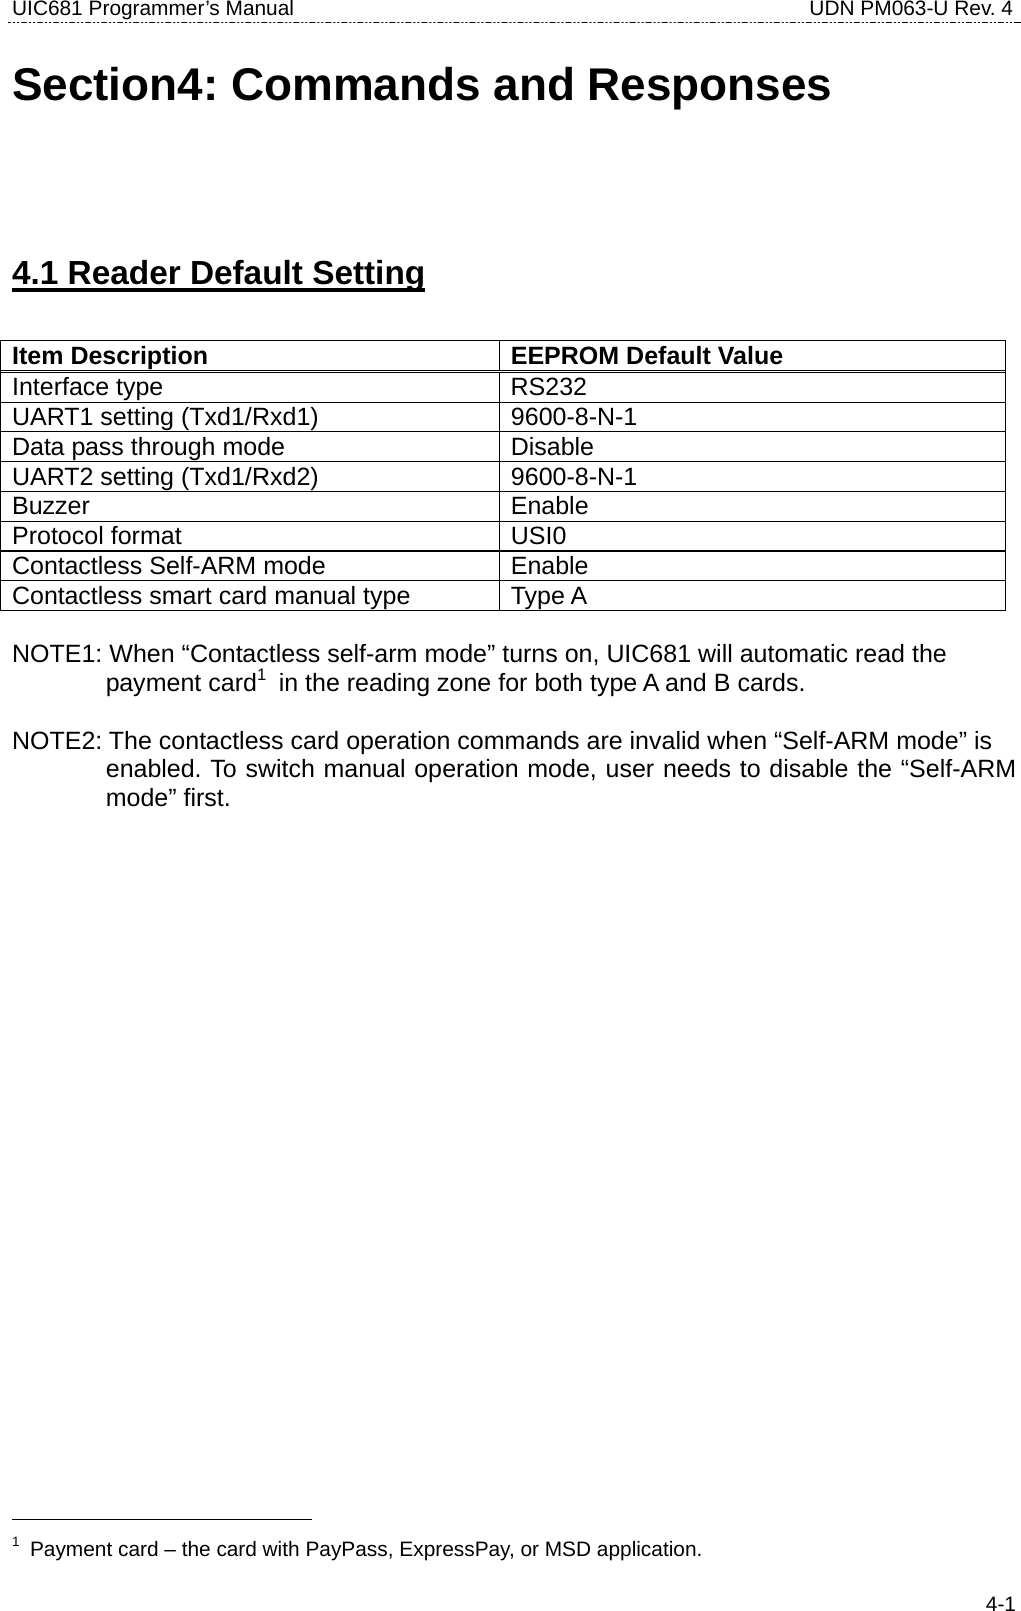 UIC681 Programmer’s Manual                                     UDN PM063-U Rev. 4  4-1Section4: Commands and Responses 4.1 Reader Default Setting  Item Description  EEPROM Default Value Interface type  RS232 UART1 setting (Txd1/Rxd1)  9600-8-N-1 Data pass through mode  Disable UART2 setting (Txd1/Rxd2)  9600-8-N-1 Buzzer Enable Protocol format  USI0 Contactless Self-ARM mode  Enable Contactless smart card manual type  Type A  NOTE1: When “Contactless self-arm mode” turns on, UIC681 will automatic read the   payment card1  in the reading zone for both type A and B cards.  NOTE2: The contactless card operation commands are invalid when “Self-ARM mode” is   enabled. To switch manual operation mode, user needs to disable the “Self-ARM mode” first.                                               1  Payment card – the card with PayPass, ExpressPay, or MSD application. 